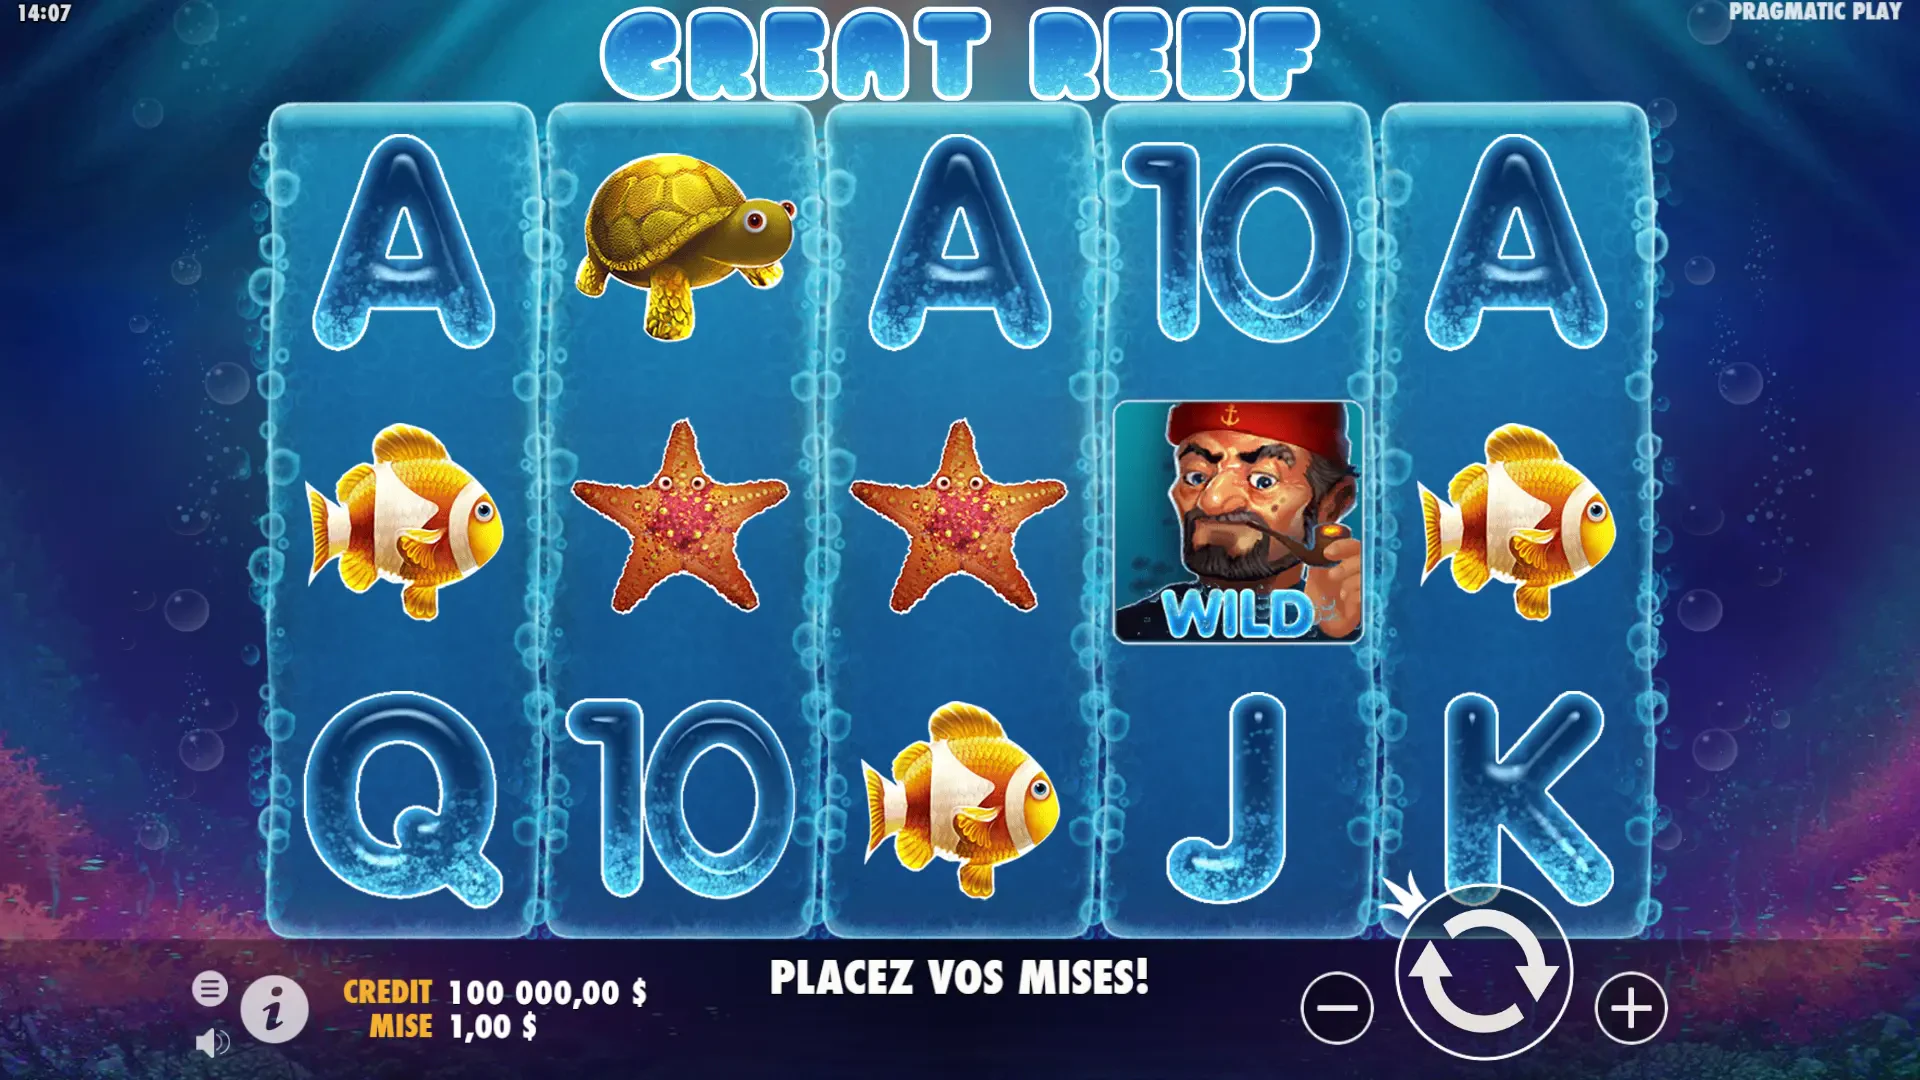 The Great Reef slot machine by Pragmatic Play